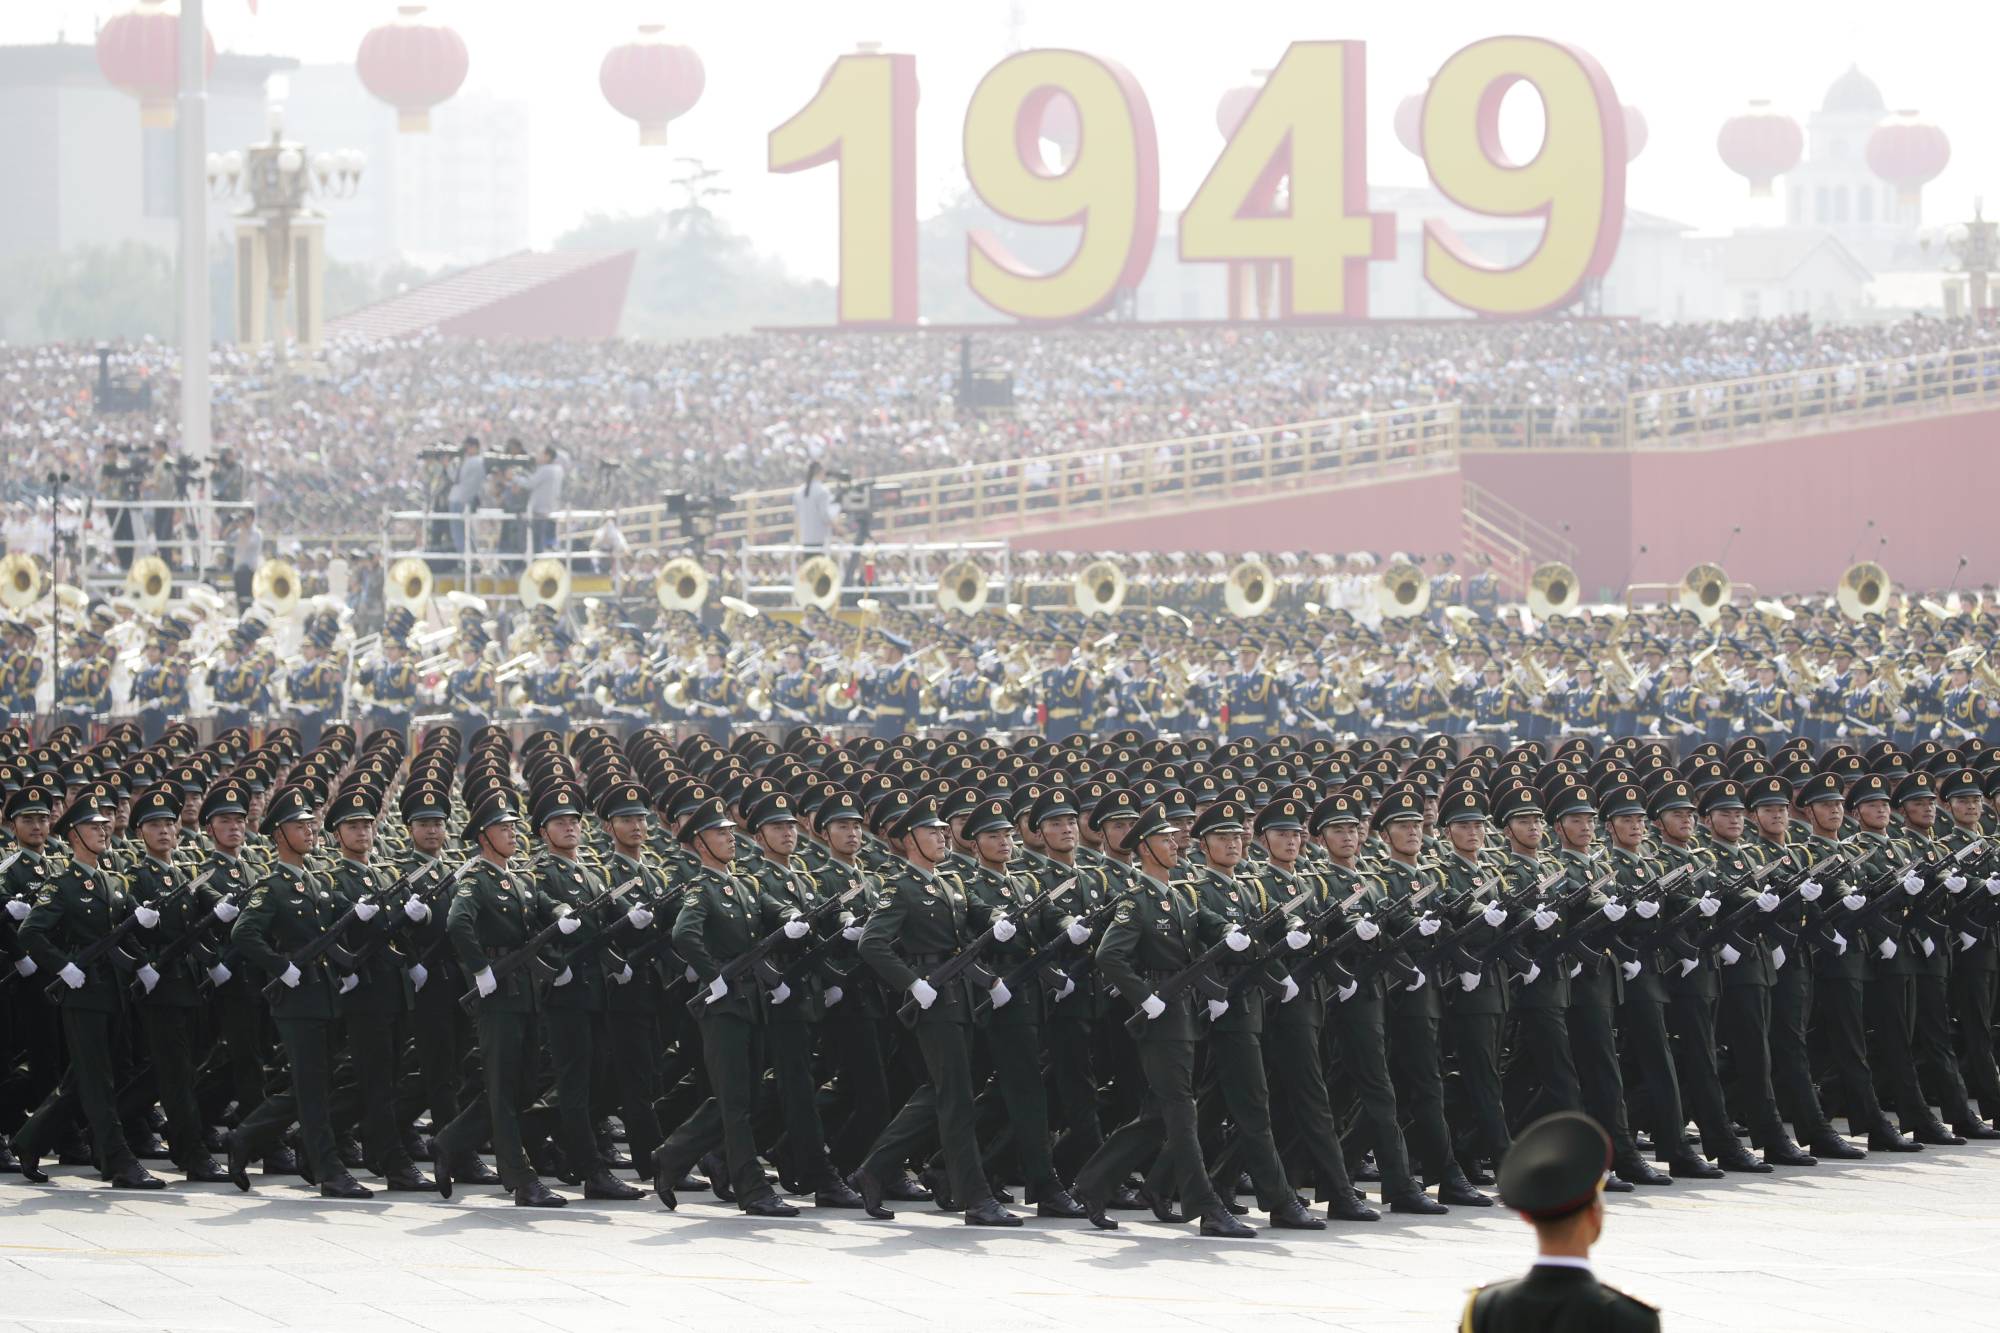 People's Liberation Army soldiers march in formation during a military parade in Beijing marking the 70th founding anniversary of People's Republic of China on Oct. 1. Nationalism has played a key role in bolstering the Chinese Communist Party's legitimacy. | REUTERS